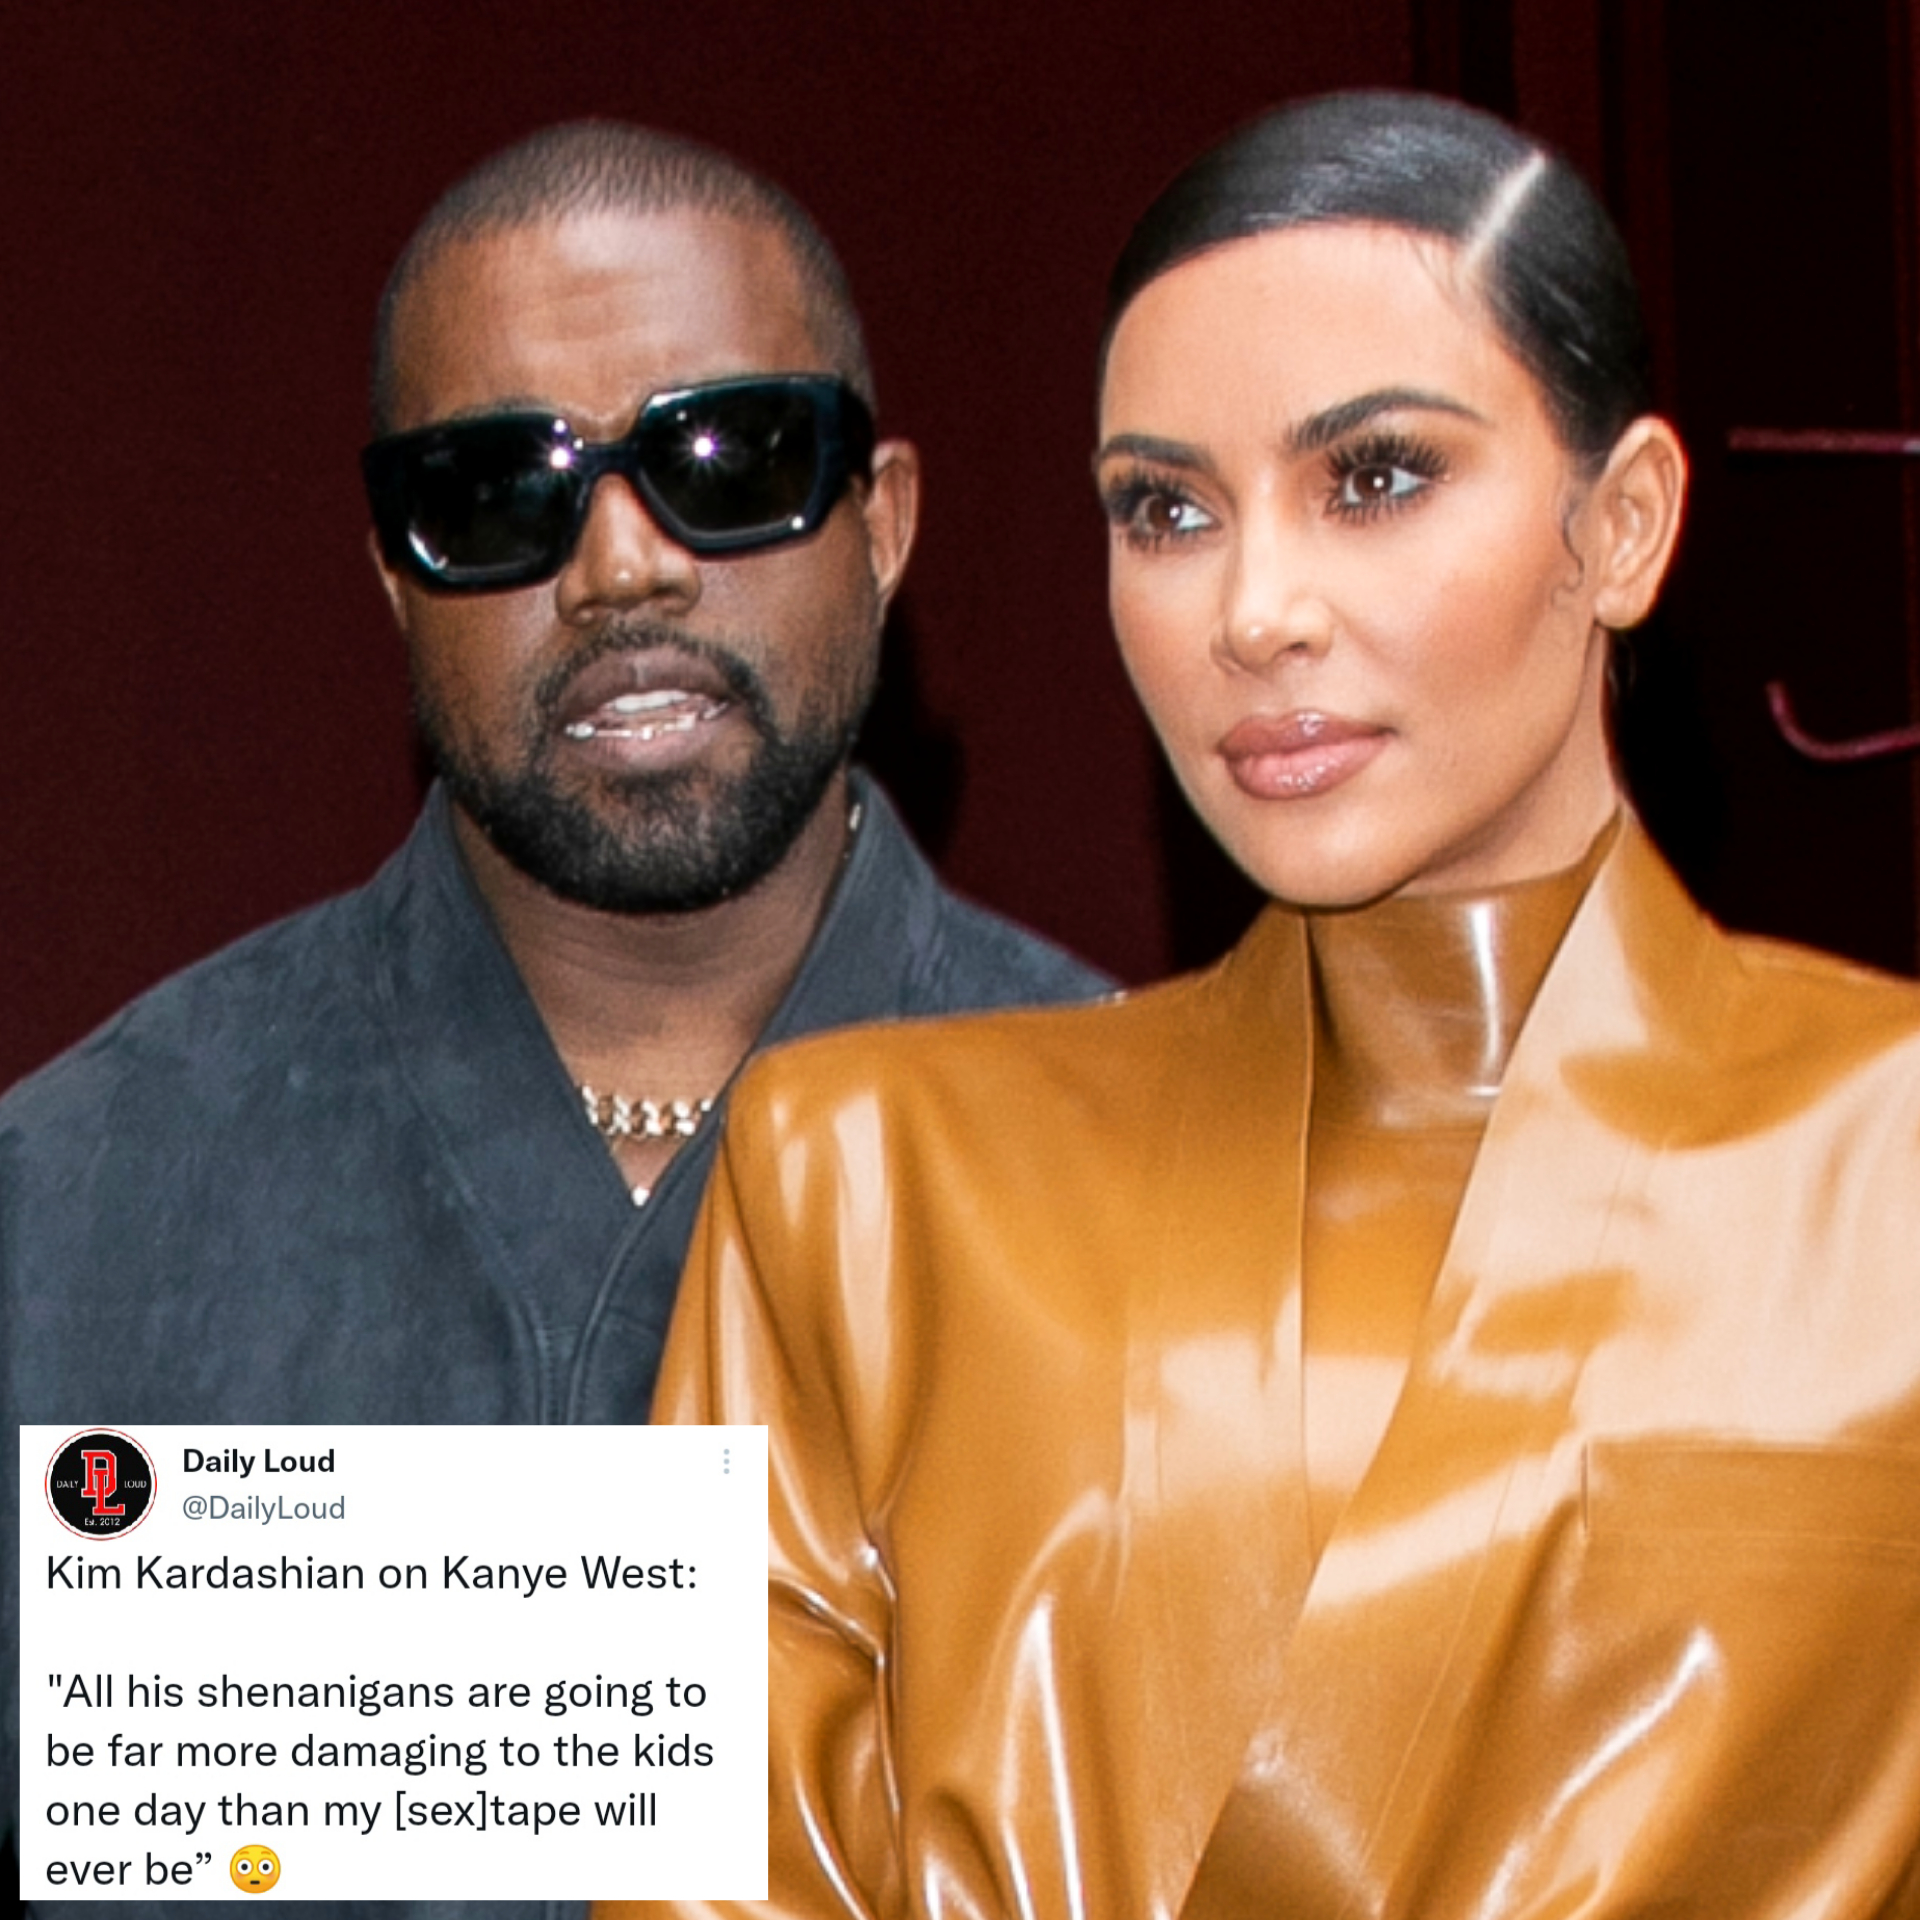 Kim Kardashian reveals how issues with Kanye will damage their kids